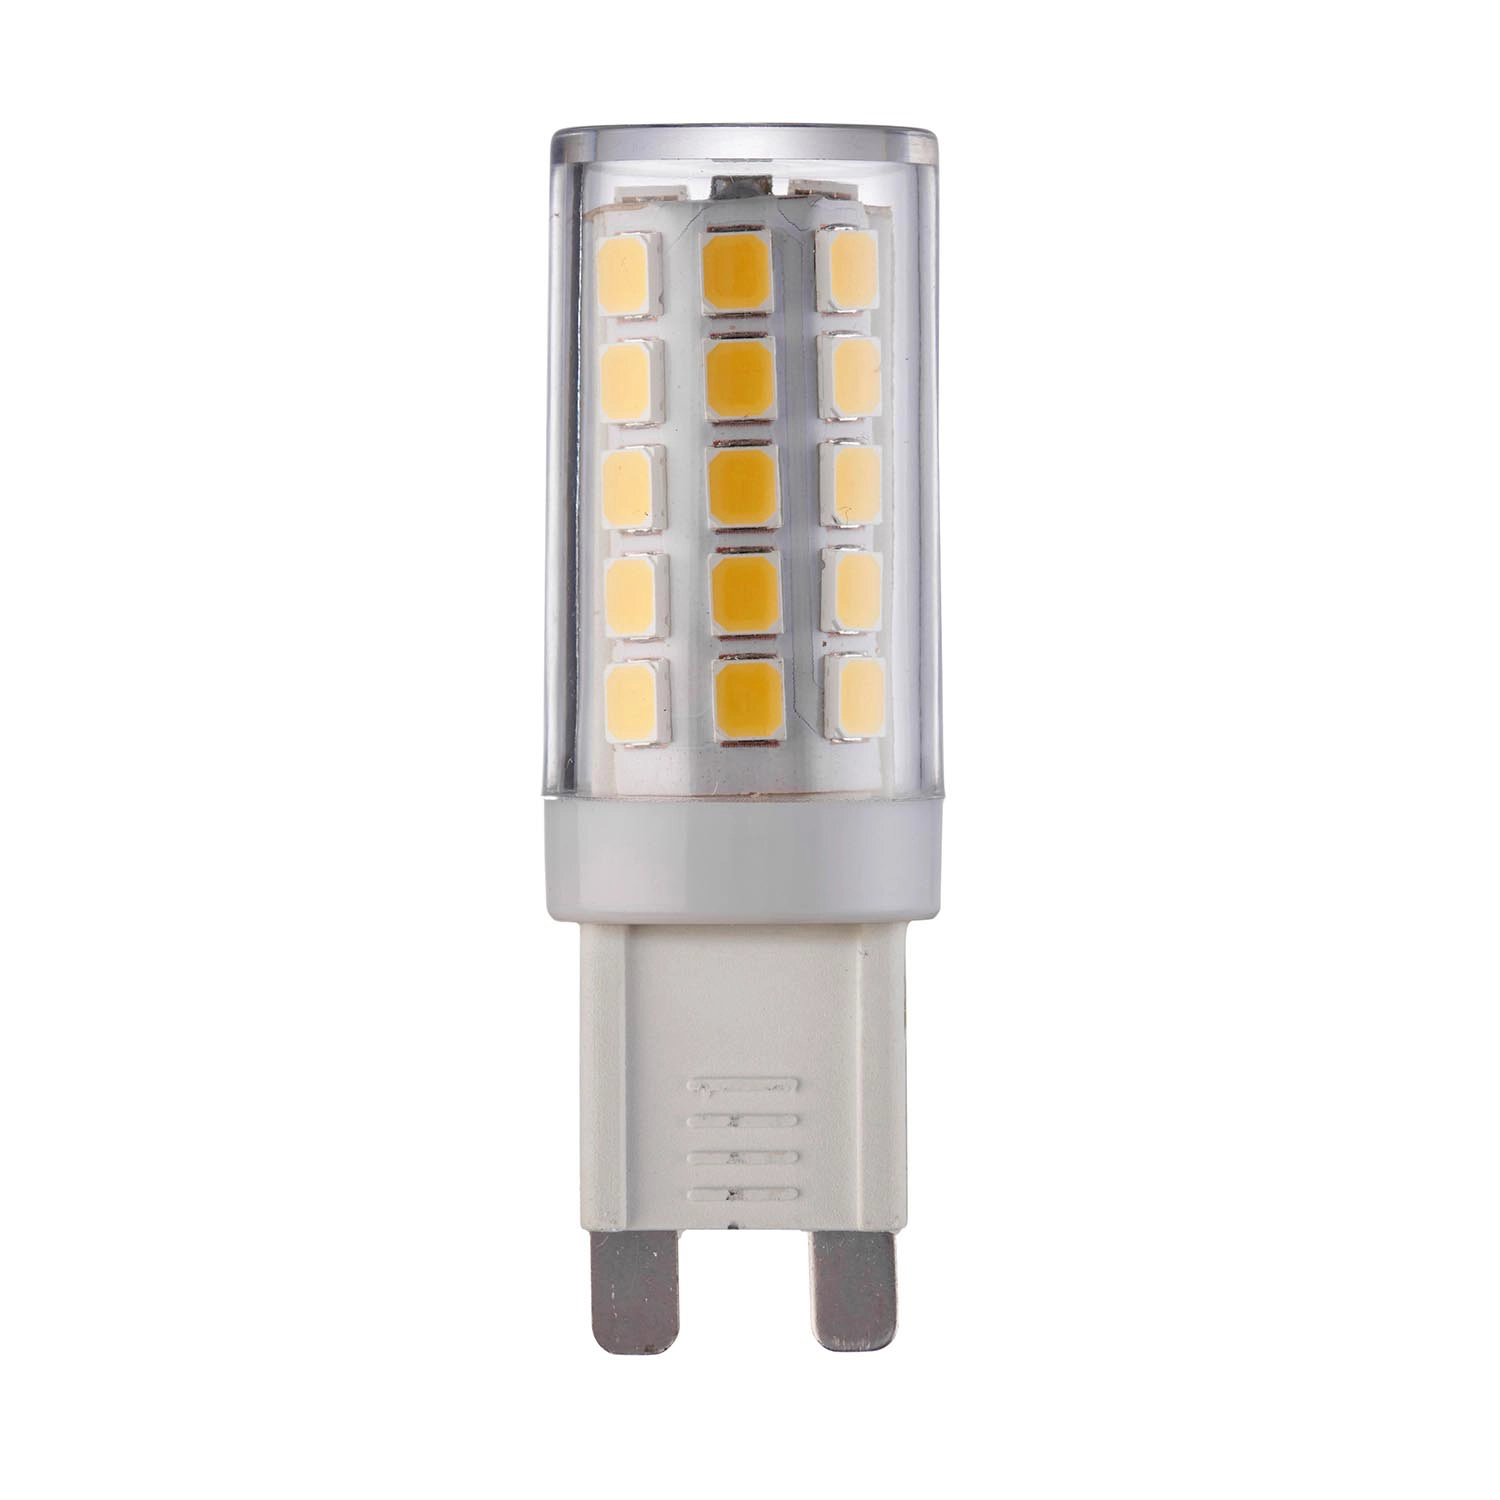 National Lighting | 3.5W SMD LED G9 Lamp in cool white 4000K - 400lm - not dimmable | National Online Shop